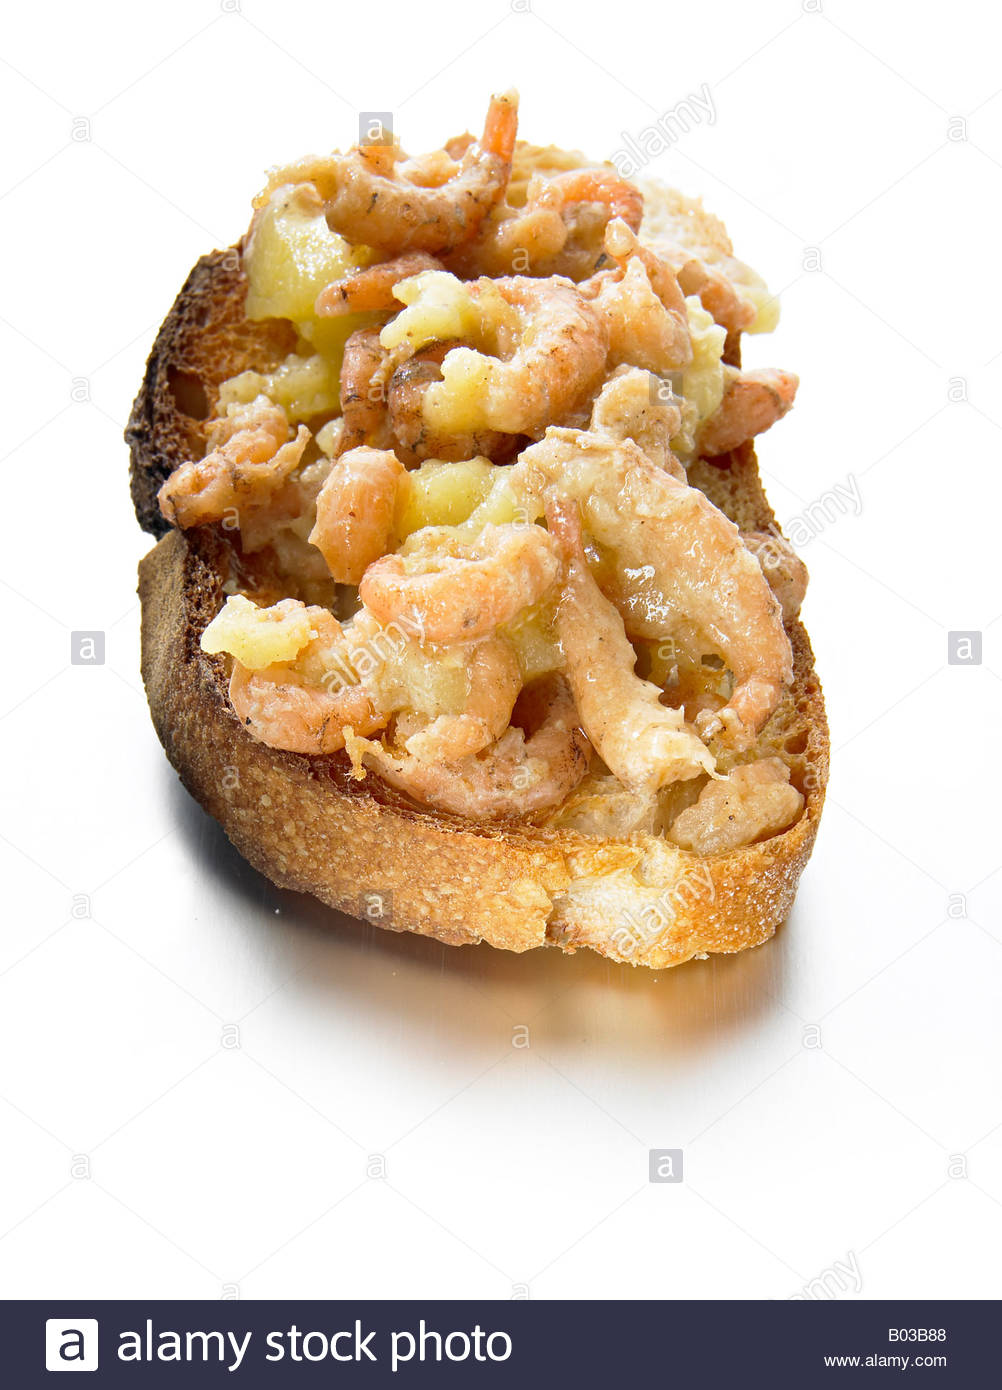 Potted Shrimps Stock Photos & Potted Shrimps Stock Images - Alamy